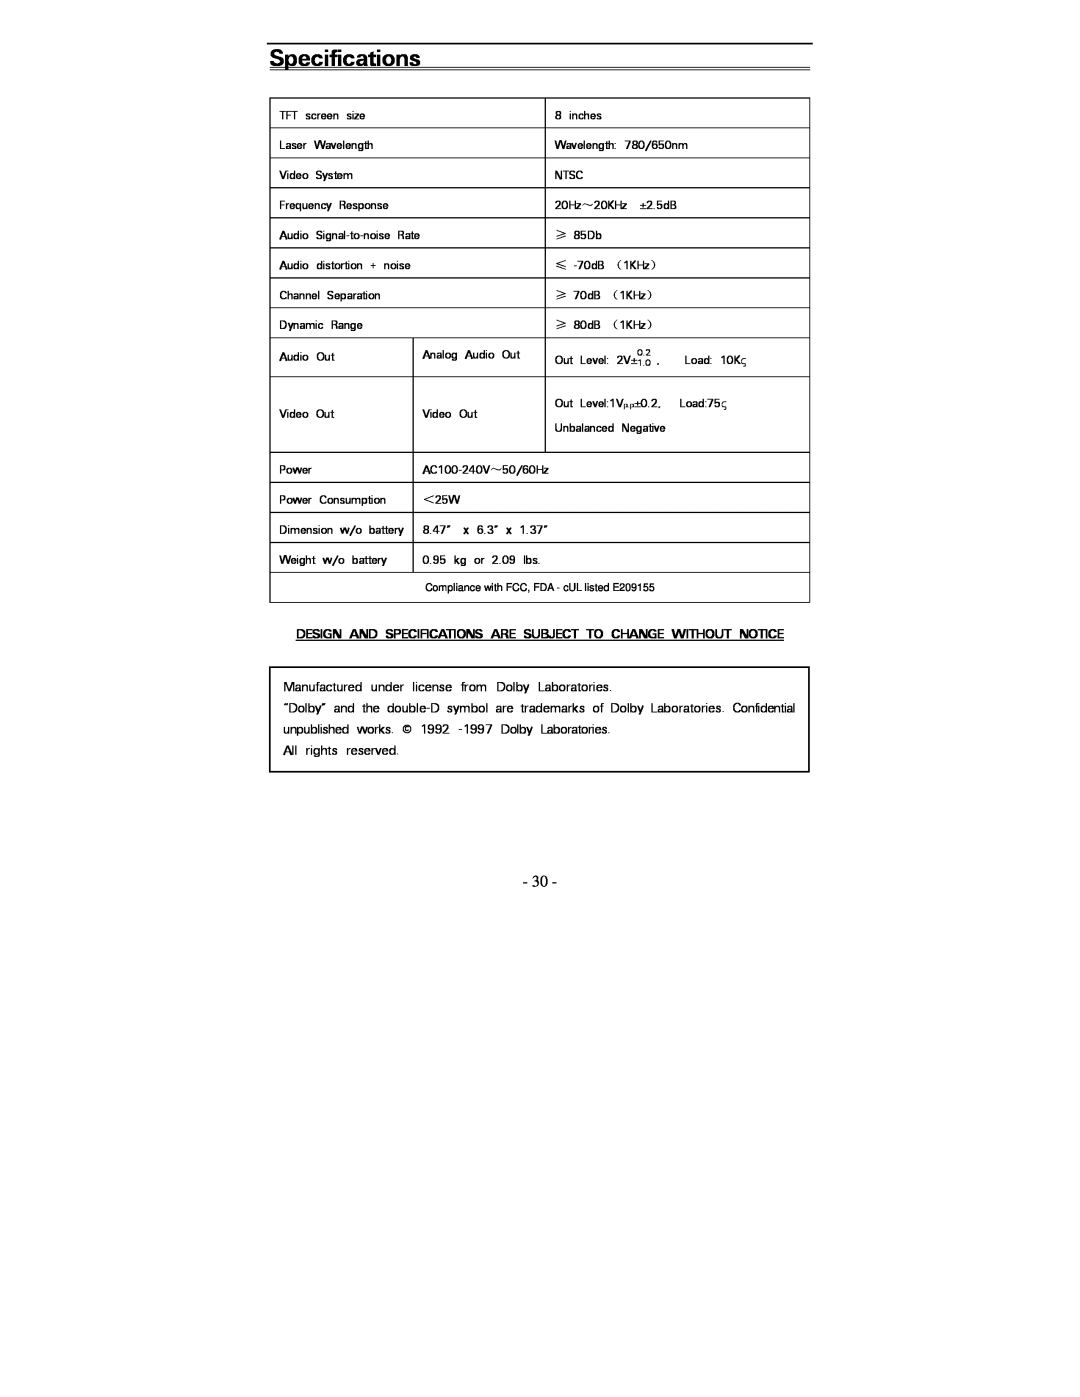 Polaroid PDV-0820T operation manual Design And Specifications Are Subject To Change Without Notice 